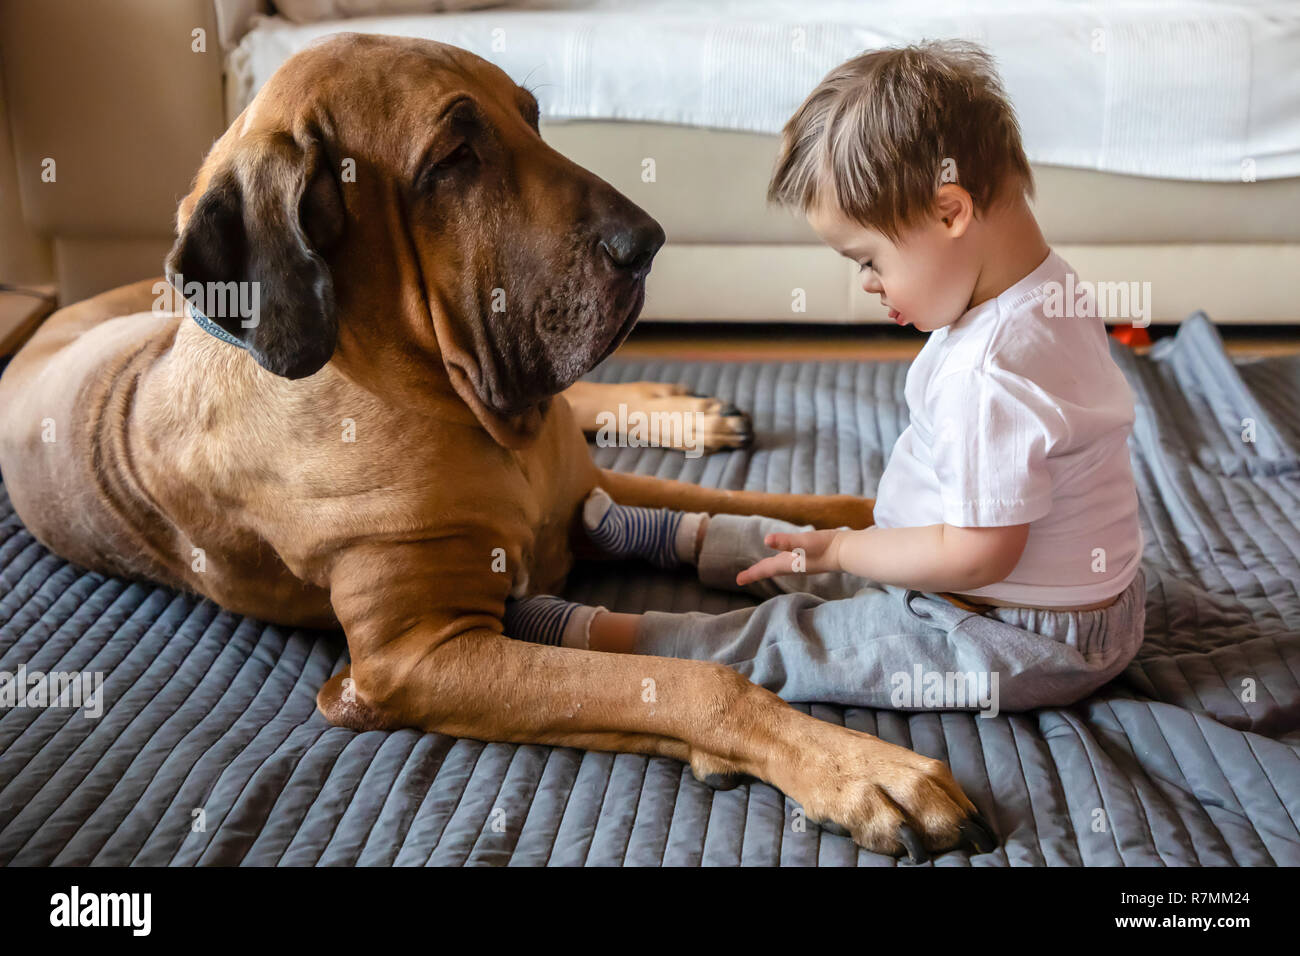 Cute small boy with Down syndrome playing with big dog Brasileiro breed Stock Photo -